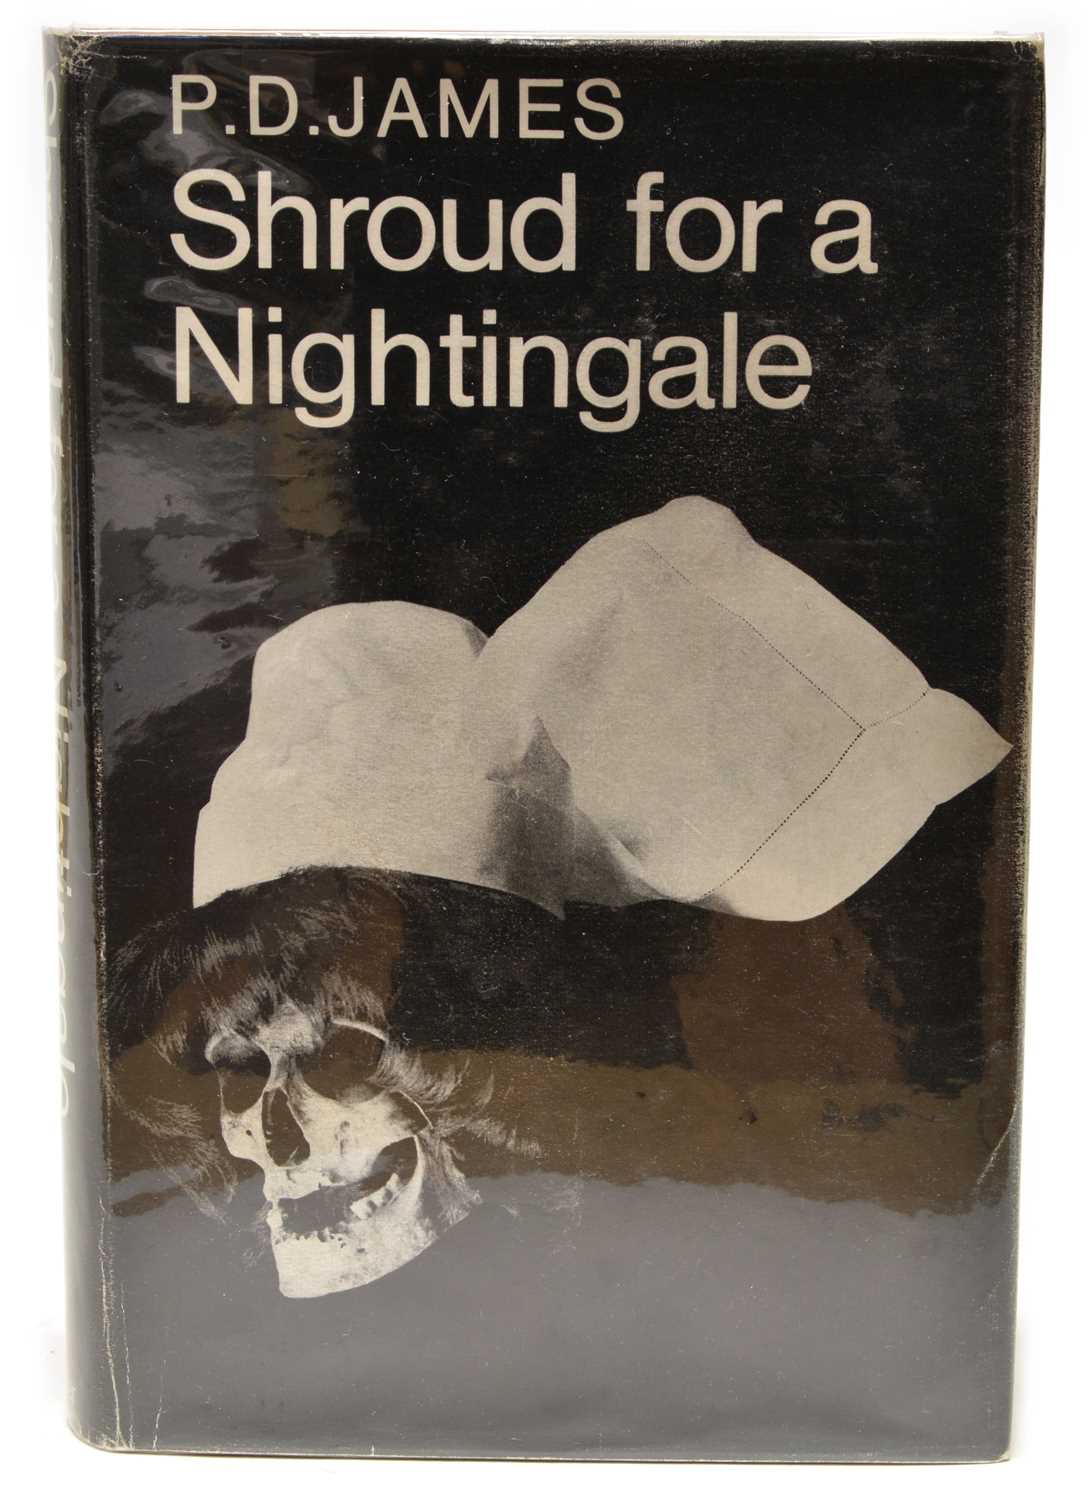 Lot 18 - Shroud for a Nightingale, signed